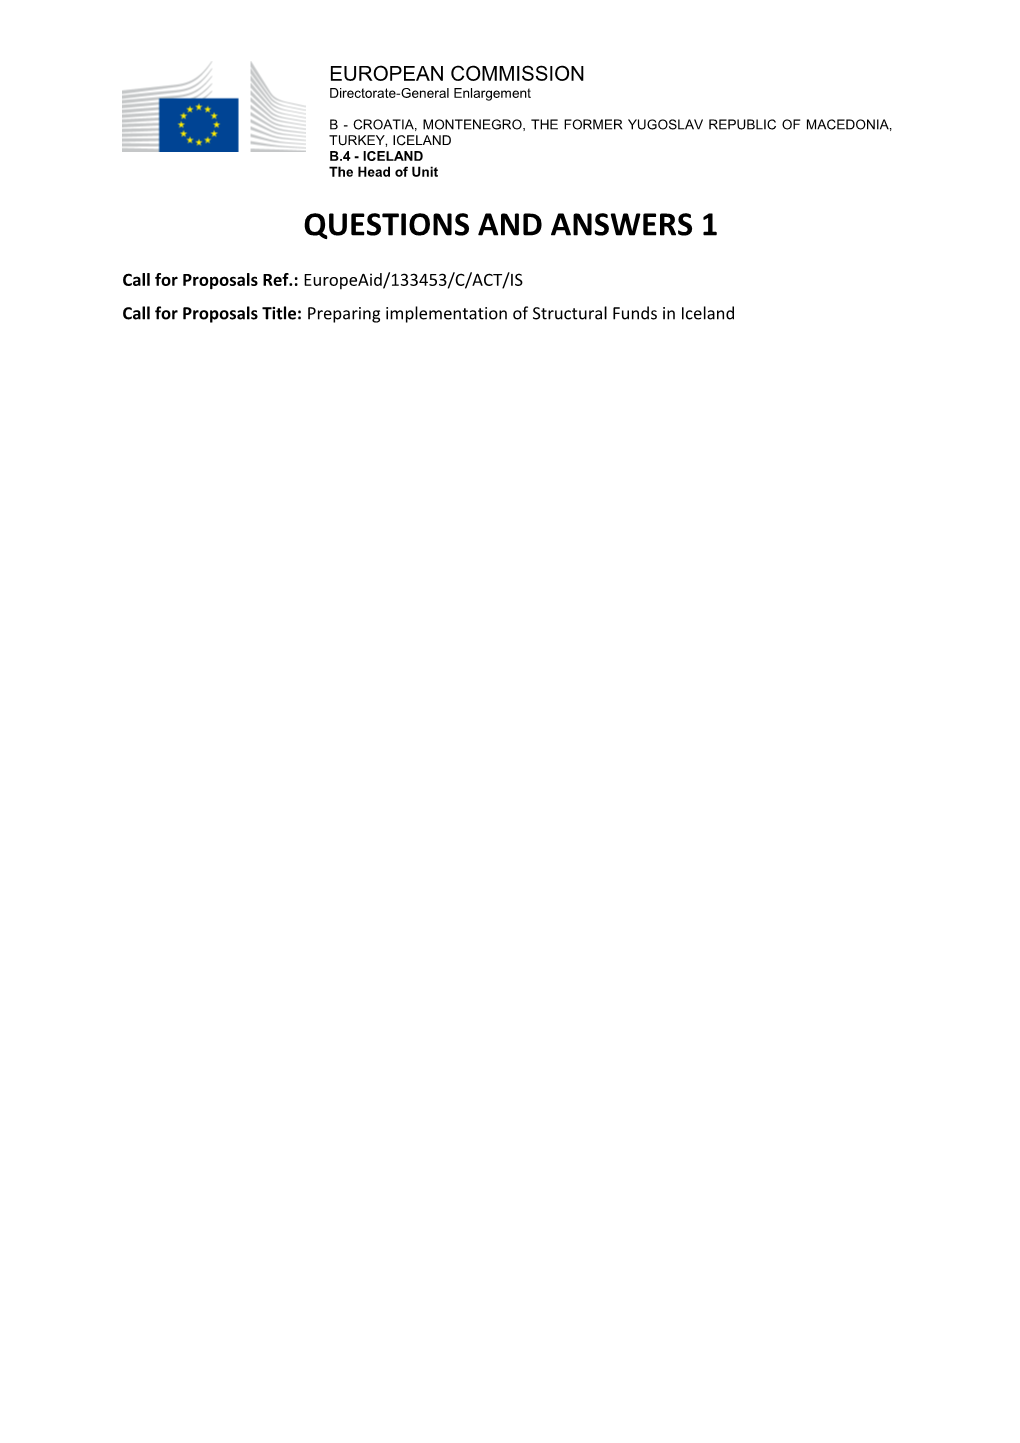 Questions and Answers 1